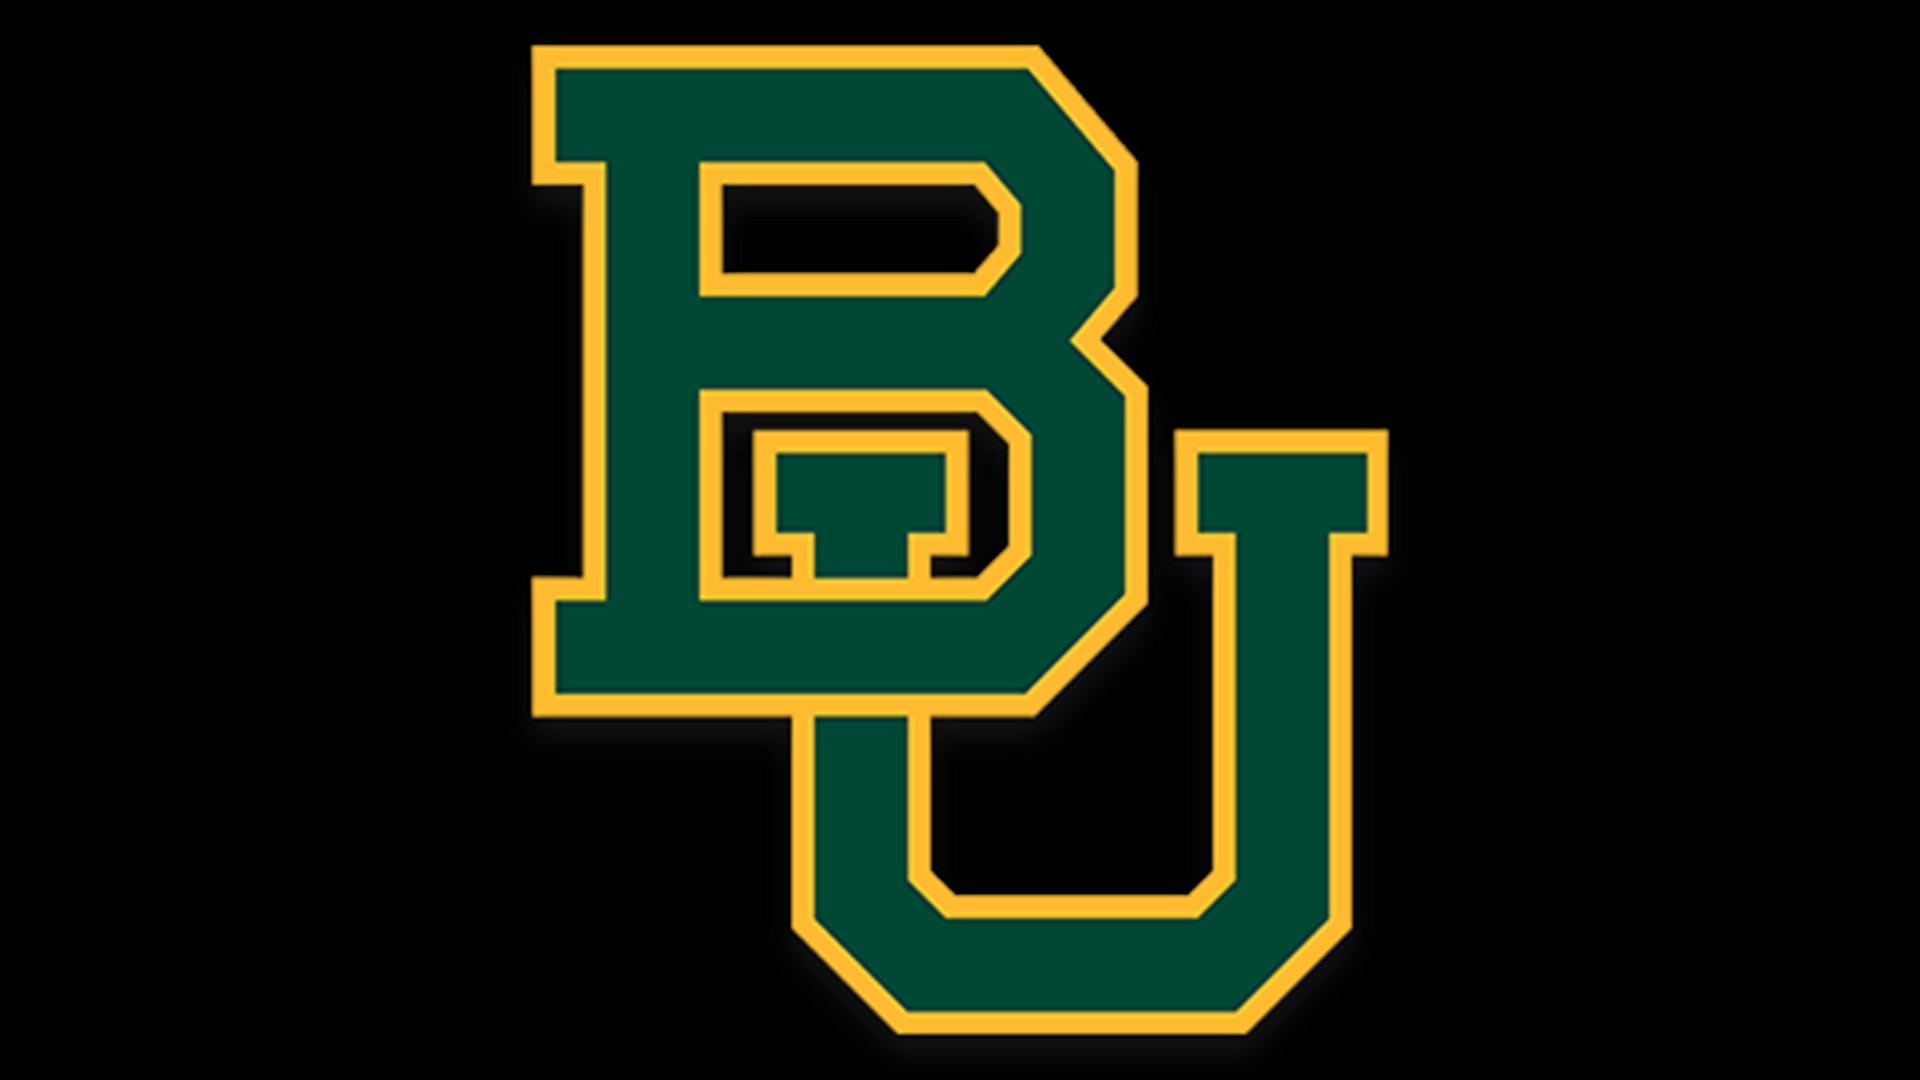 Baylor University Vice President and Director of Intercollegiate Athletics Mack Rhoades said the suspension will be staggered over the course of three weeks.